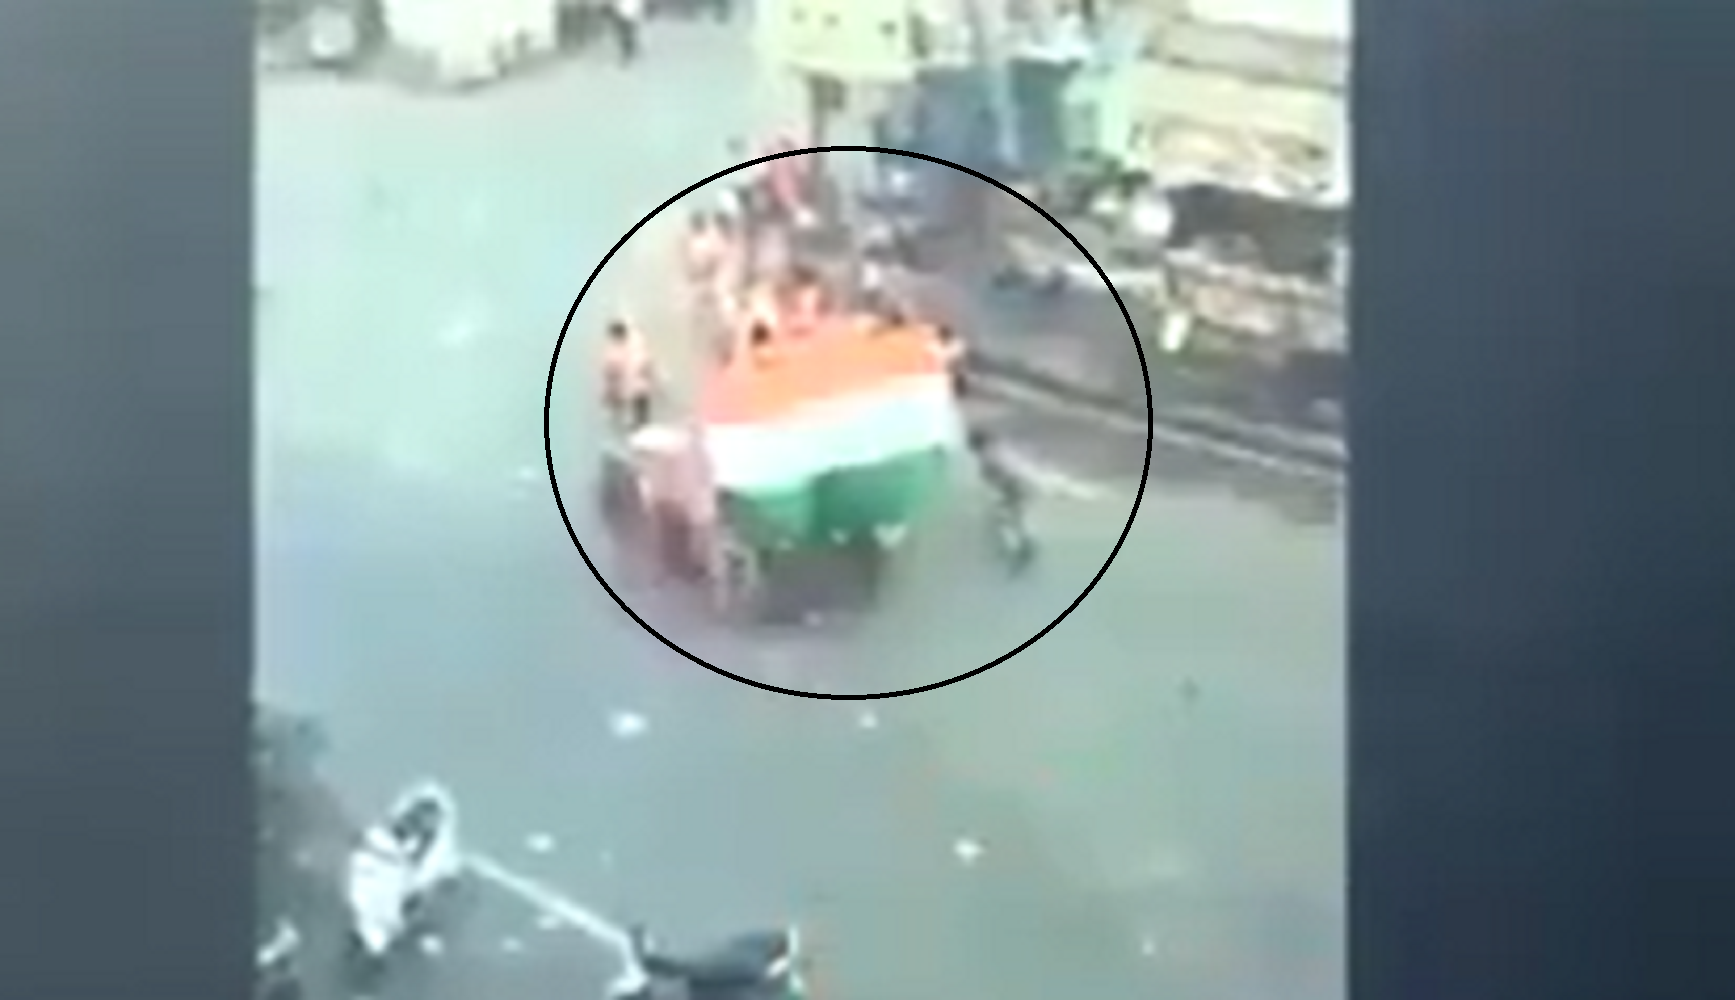 National flag attacked in Jahangirpuri